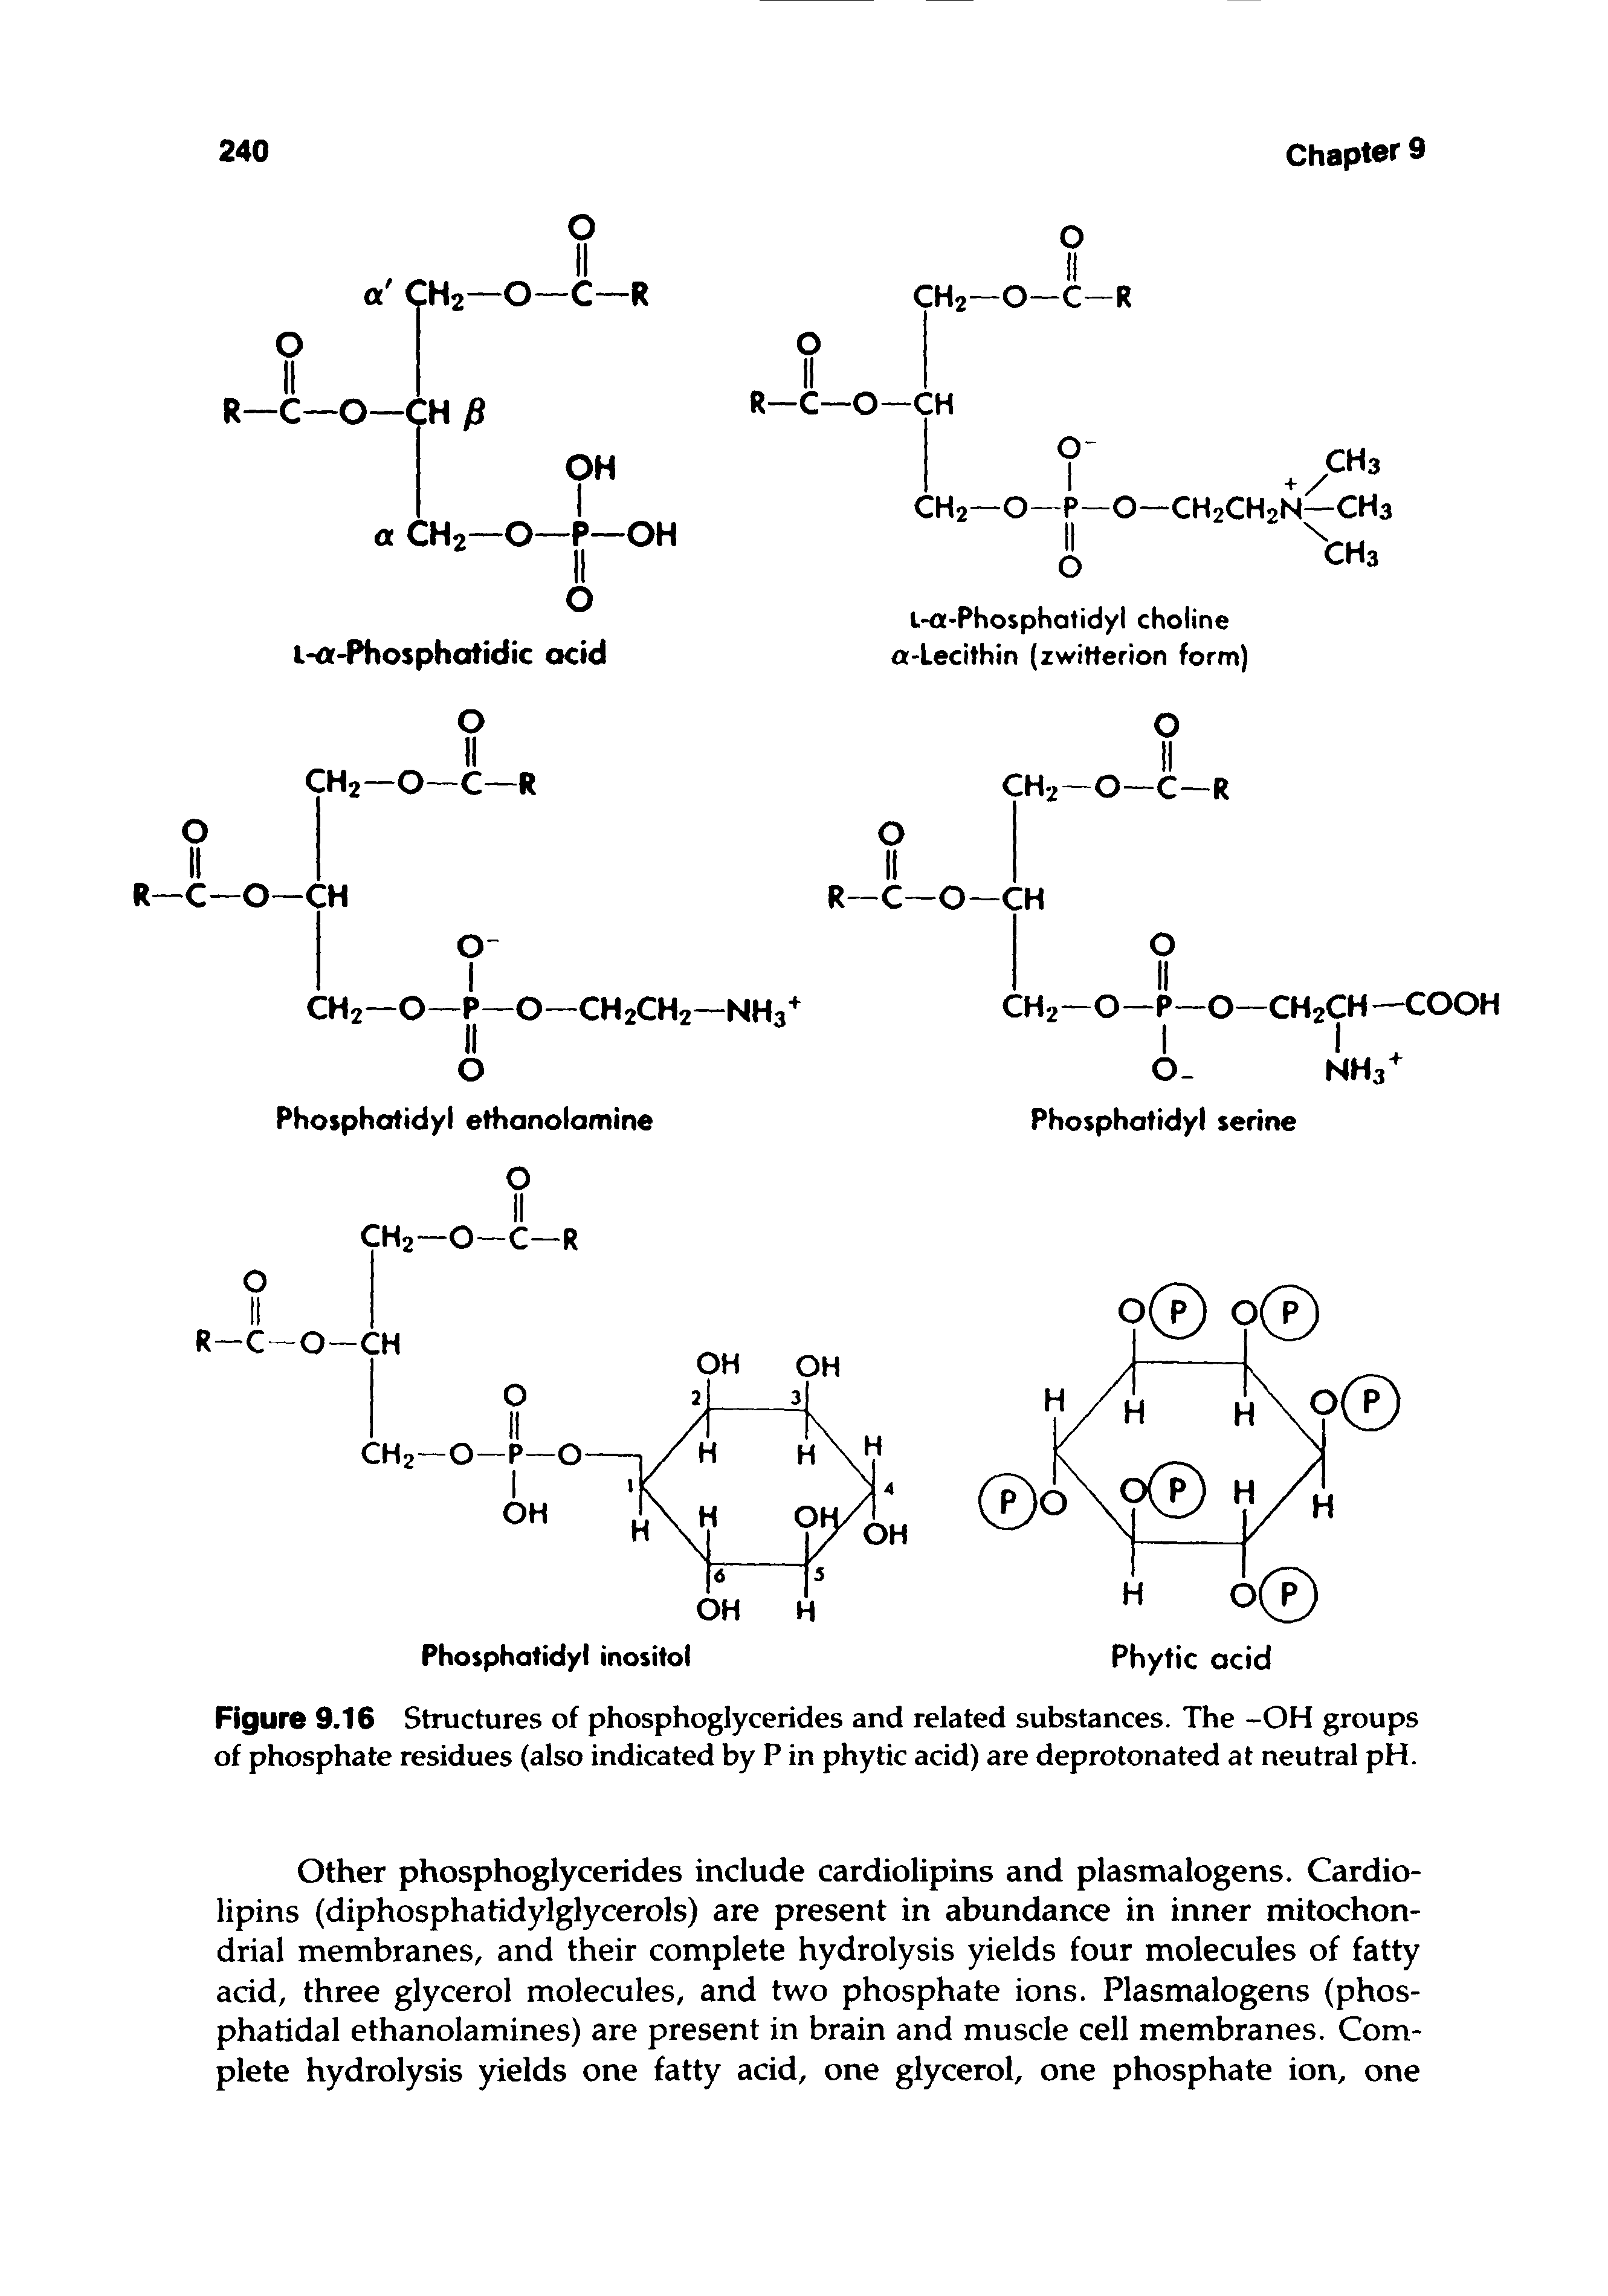 Figure 9.16 Structures of phosphoglycerides and related substances. The -OH groups of phosphate residues (also indicated by P in phytic acid) are deprotonated at neutral pH.